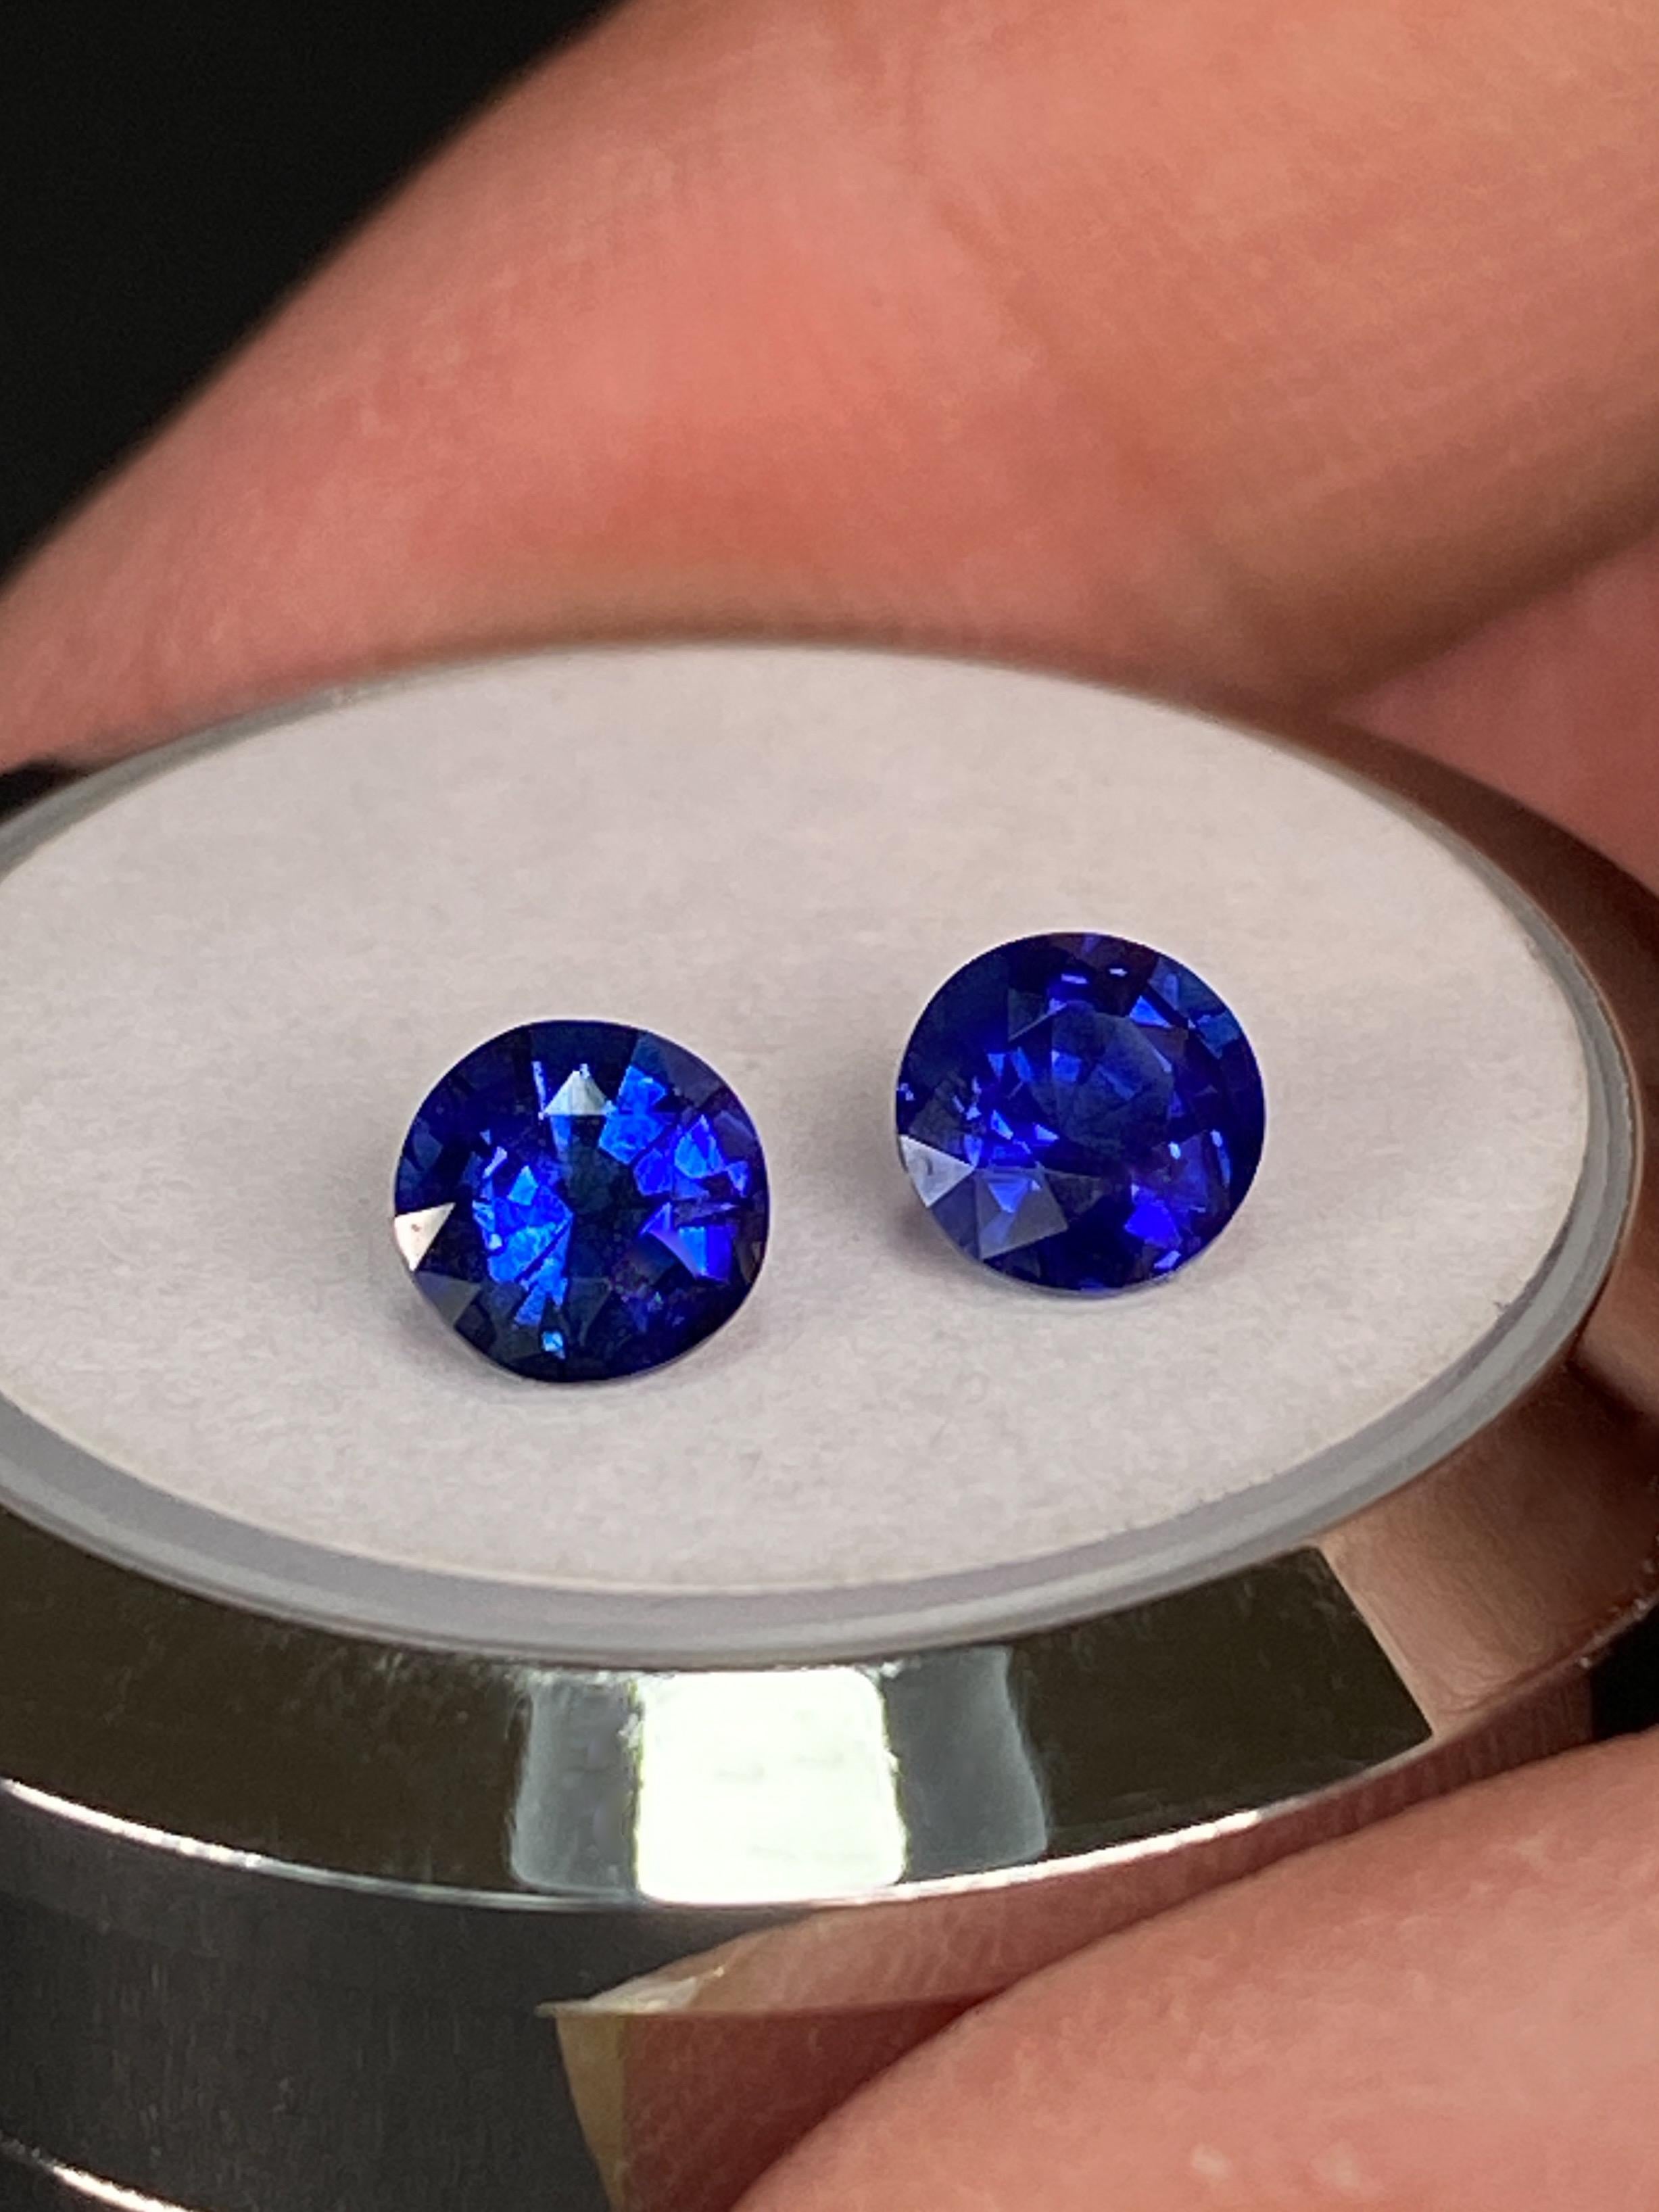 The Sapphire Merchant presents this captivating 1.18ct Natural Royal Blue Sapphire Pair to 1stDibs. Each gemstone weighs approx 0.59 carats, presenting a harmonious symmetry in round shapes. Their round brilliant cut enhances their brilliance and